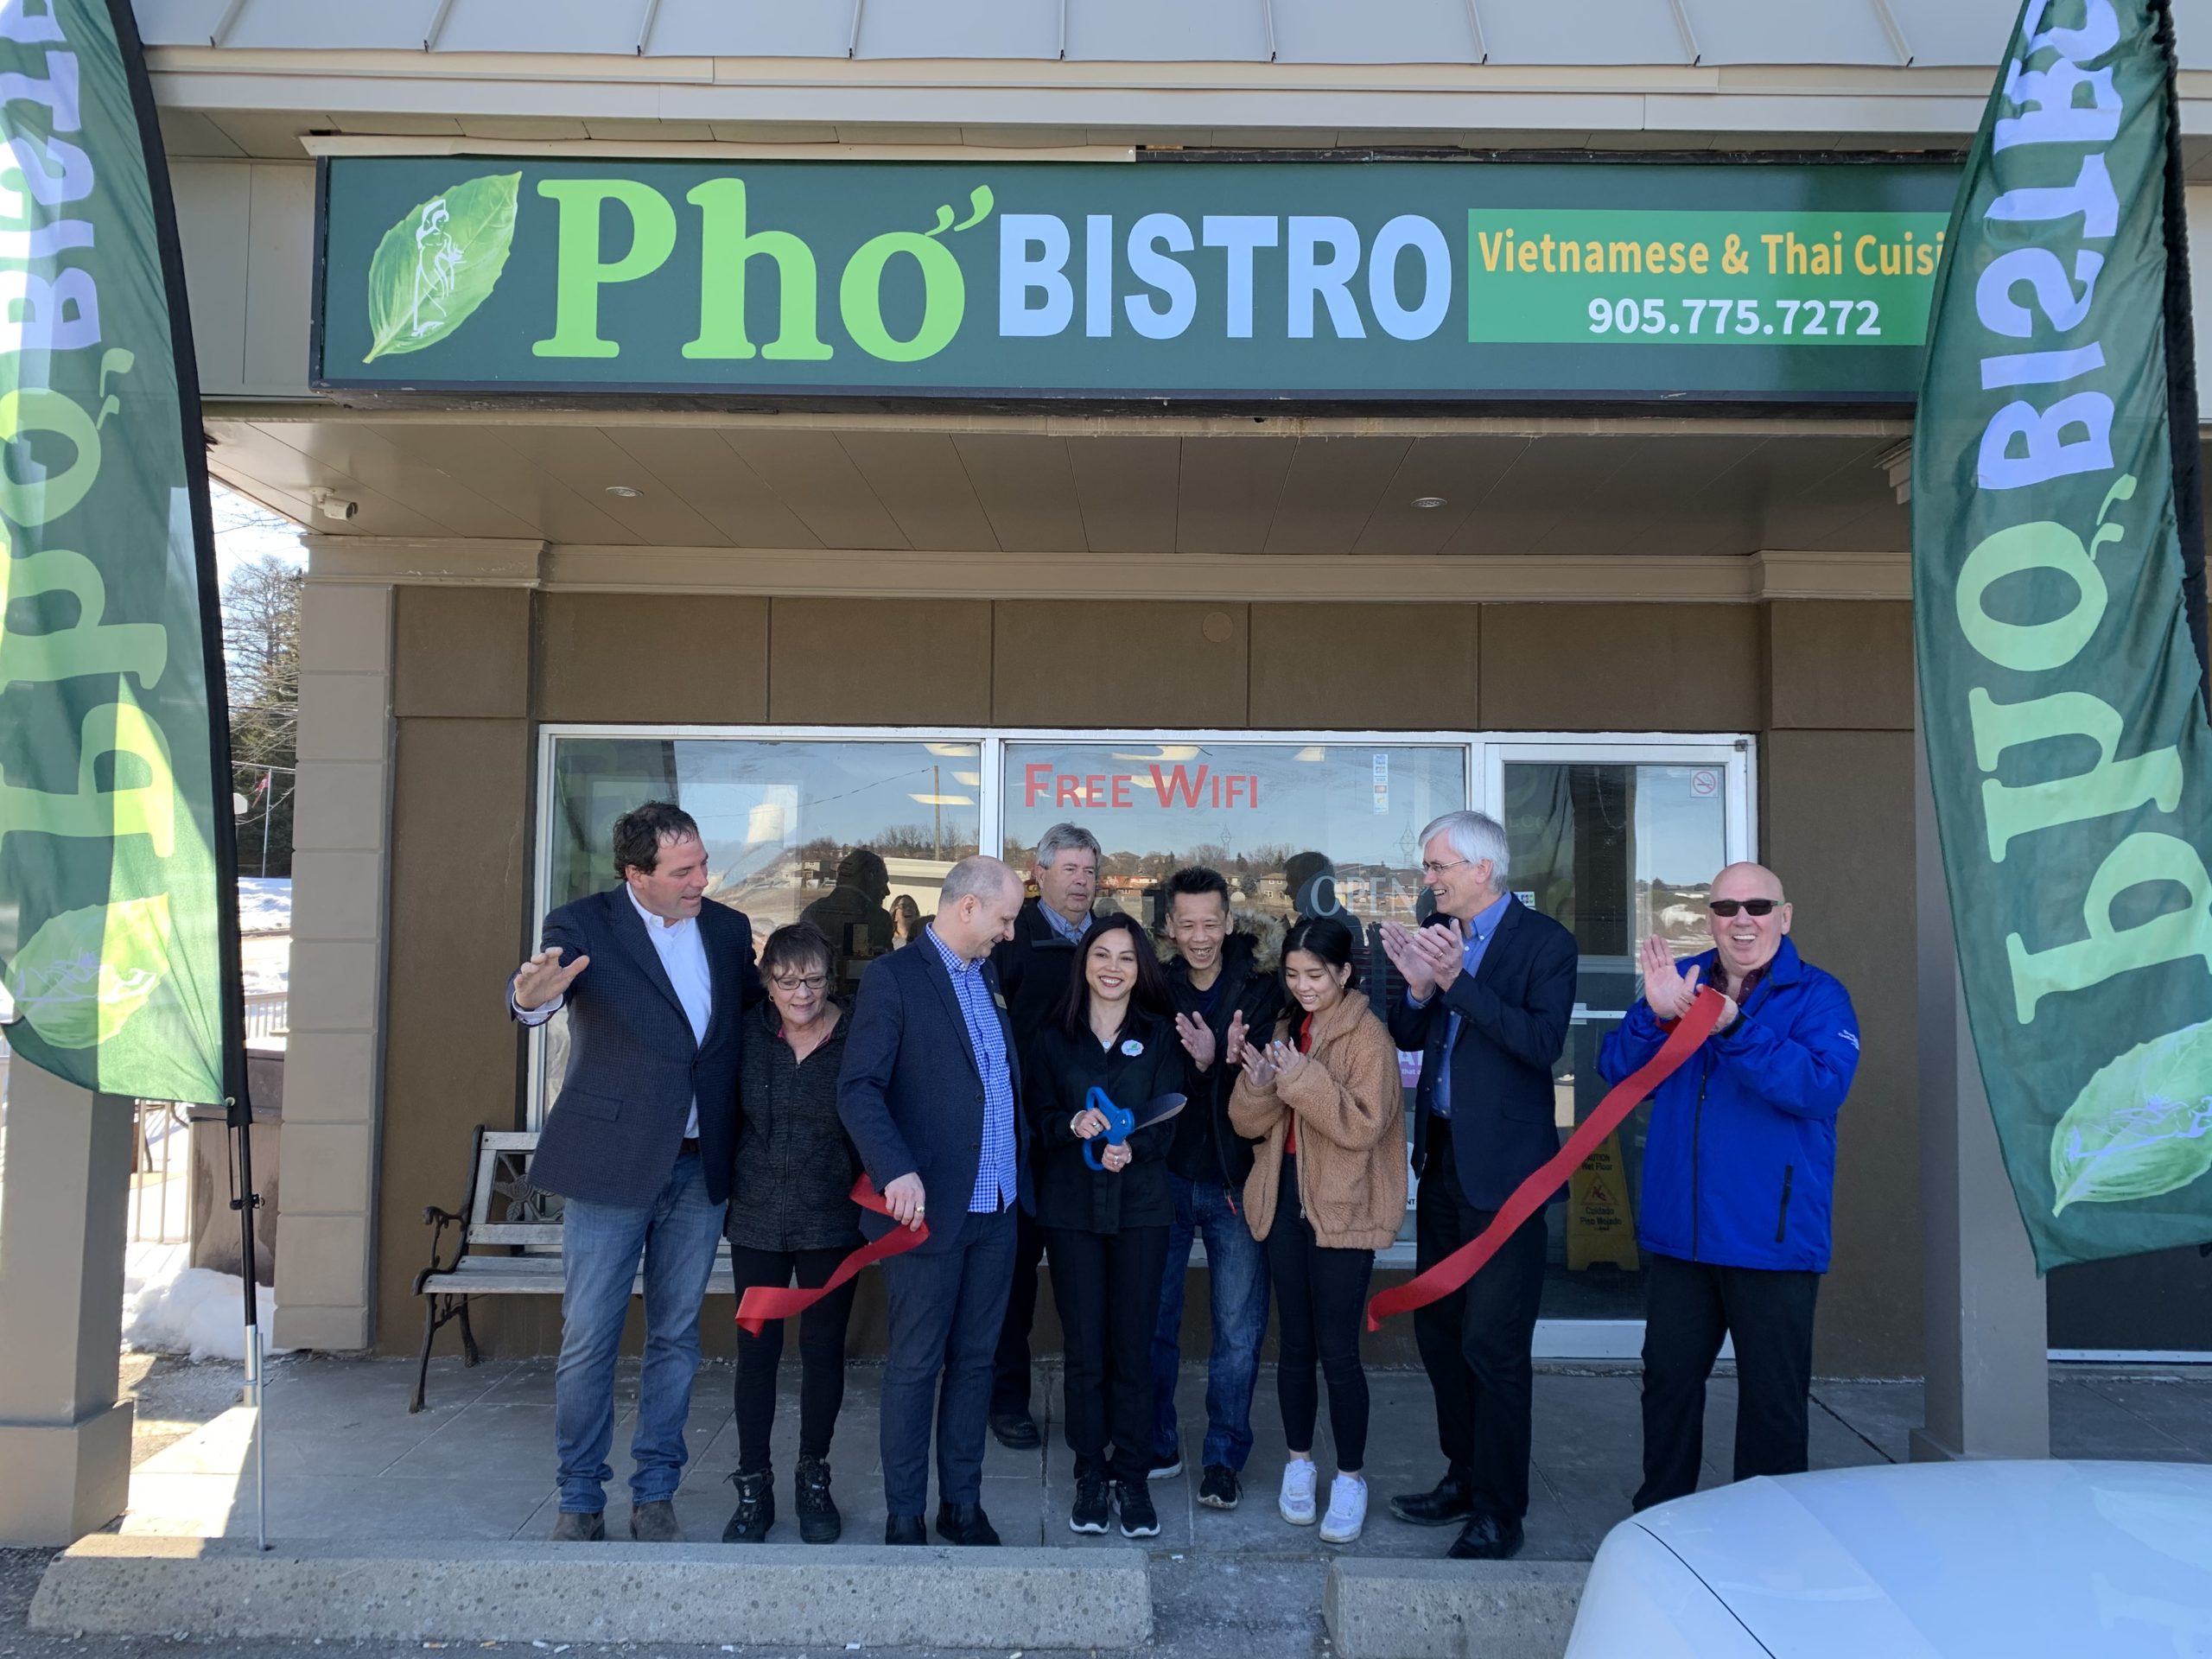 Grand Opening of Pho Bistro